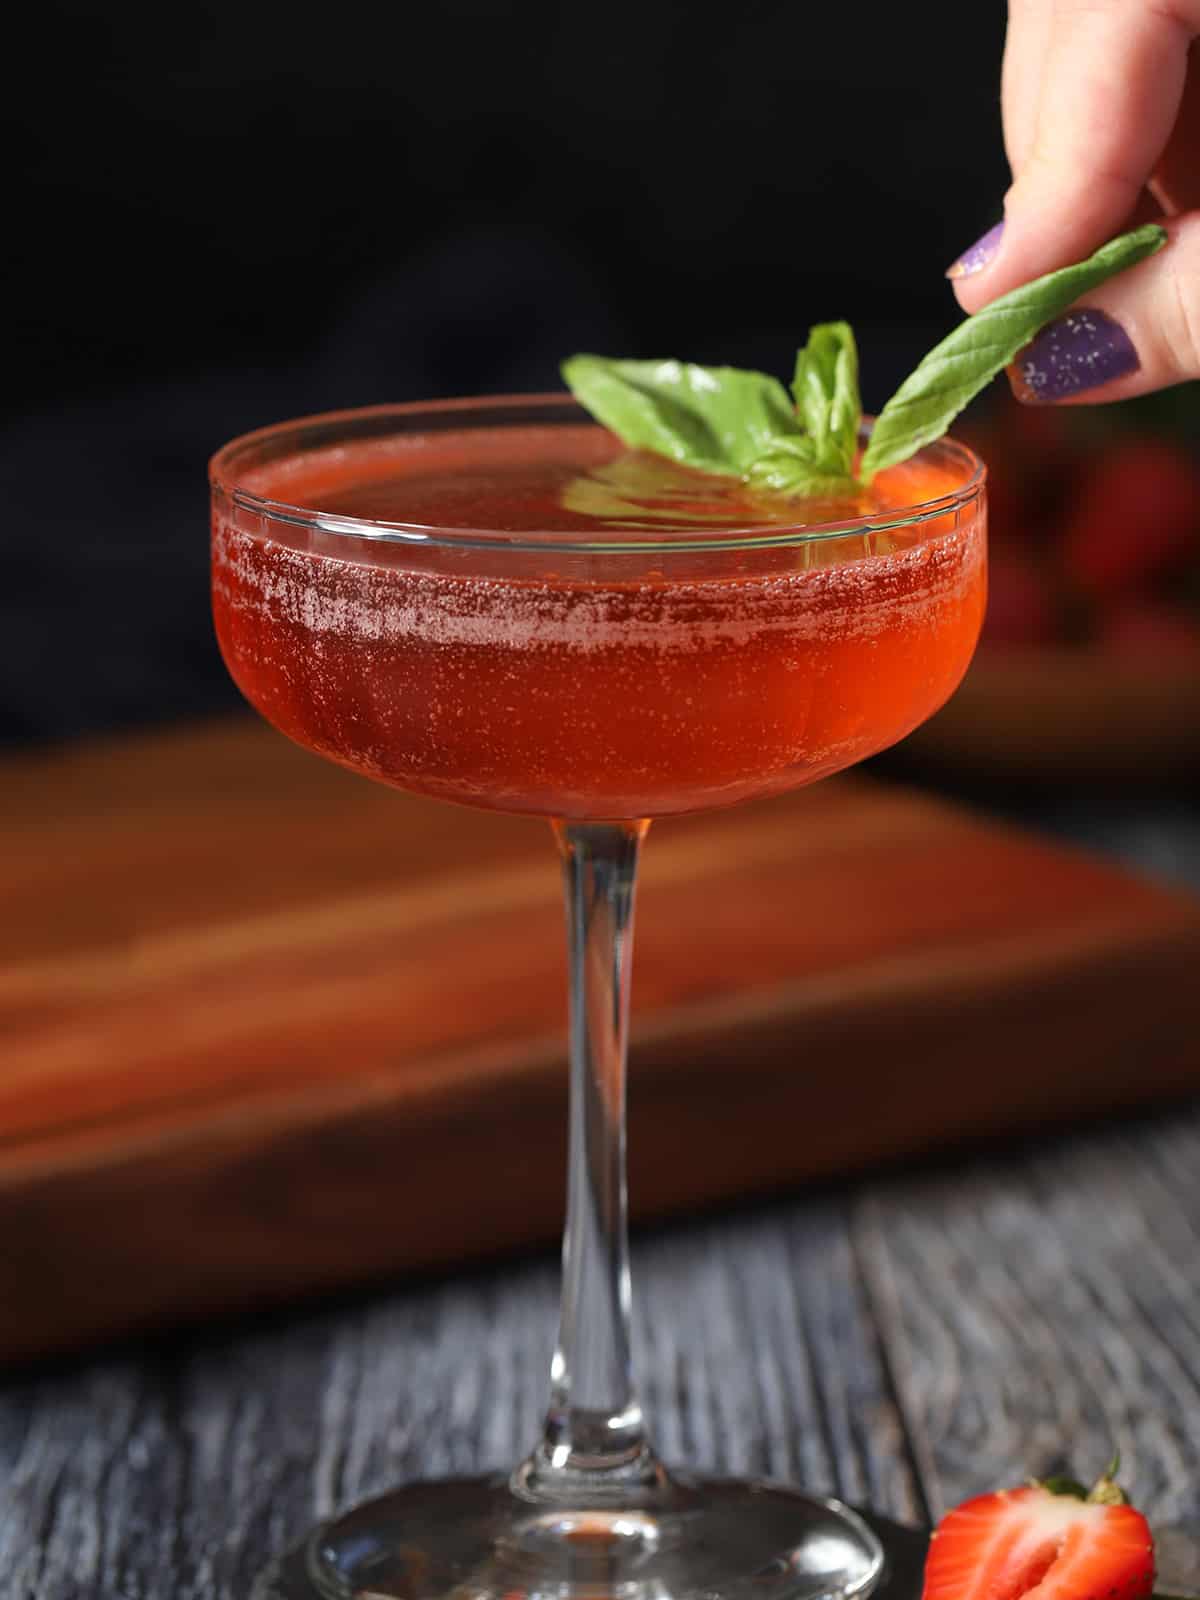 A hand garnishing a glass of strawberry basil cocktail with a basil leaf.